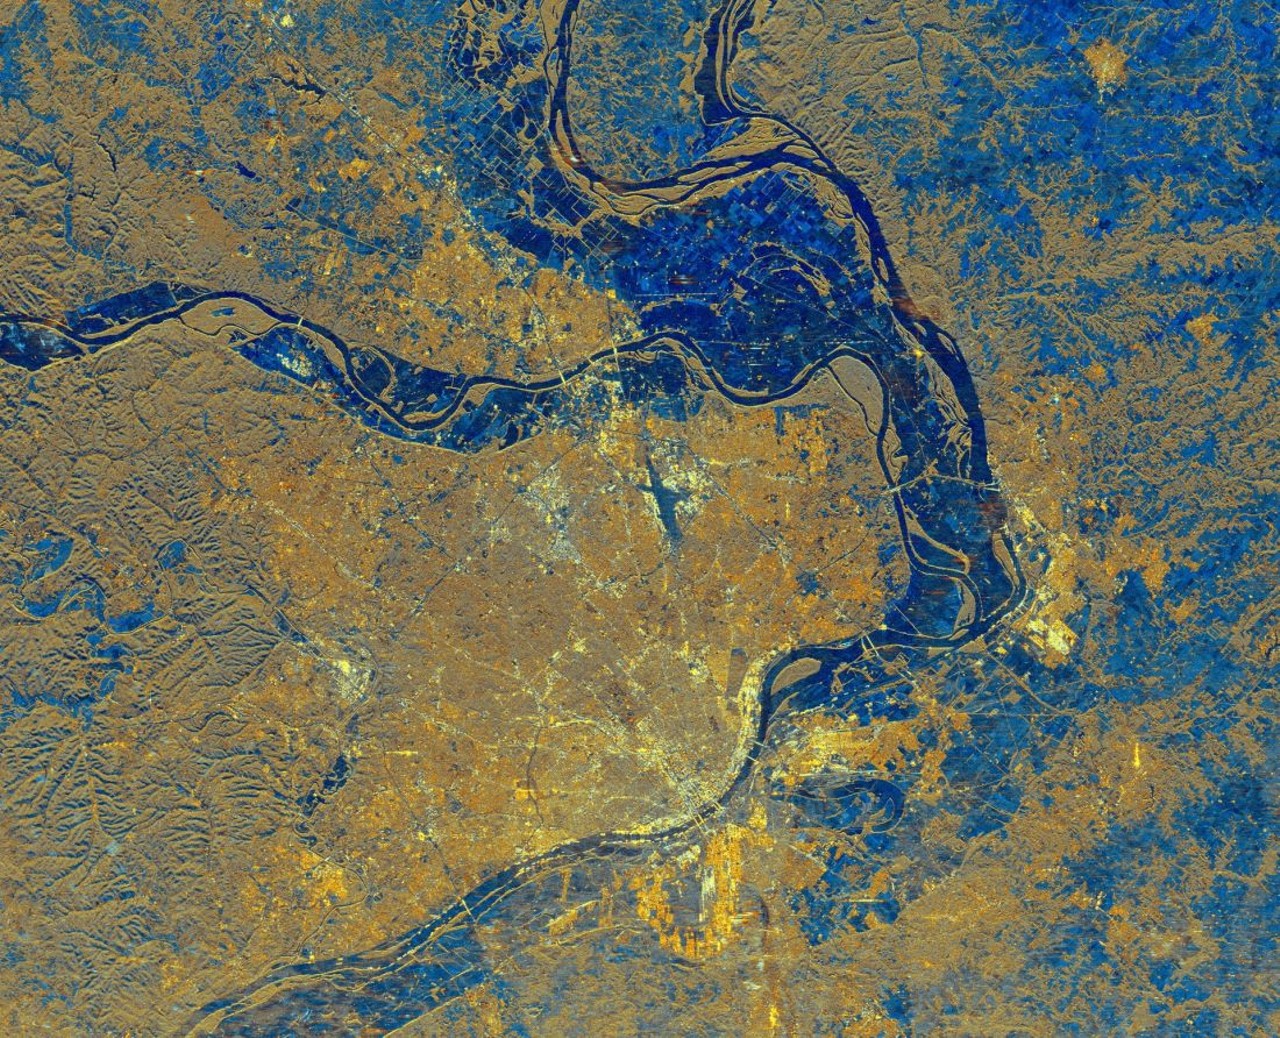 ST. LOUIS AND THE MISSOURI AND MISSISSIPPI RIVER CONFLUENCE FROM SPACE, 1999
NASA images.